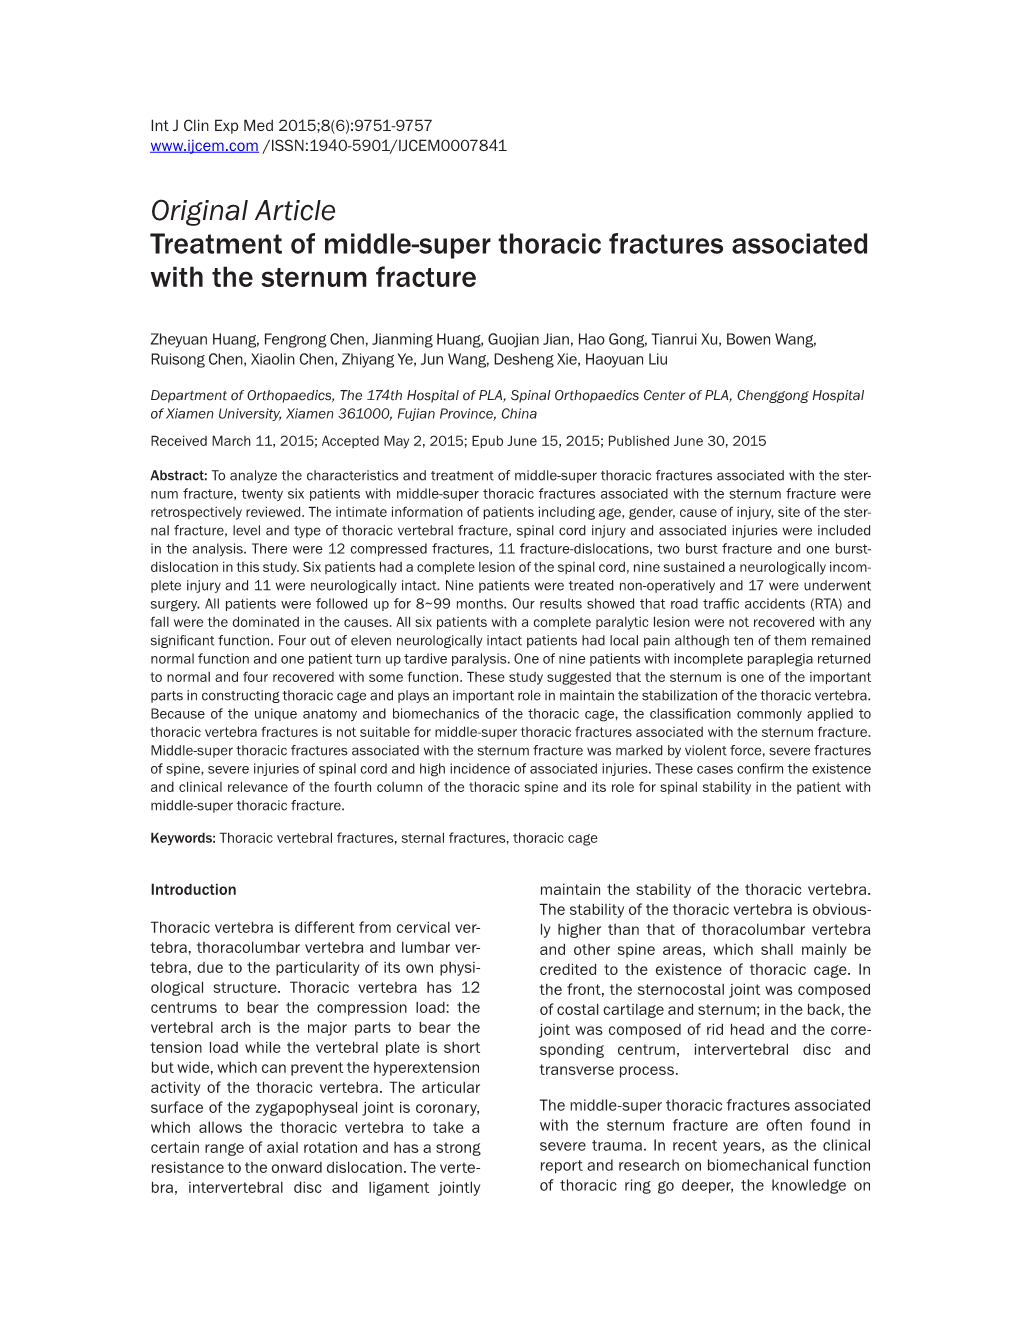 Original Article Treatment of Middle-Super Thoracic Fractures Associated with the Sternum Fracture